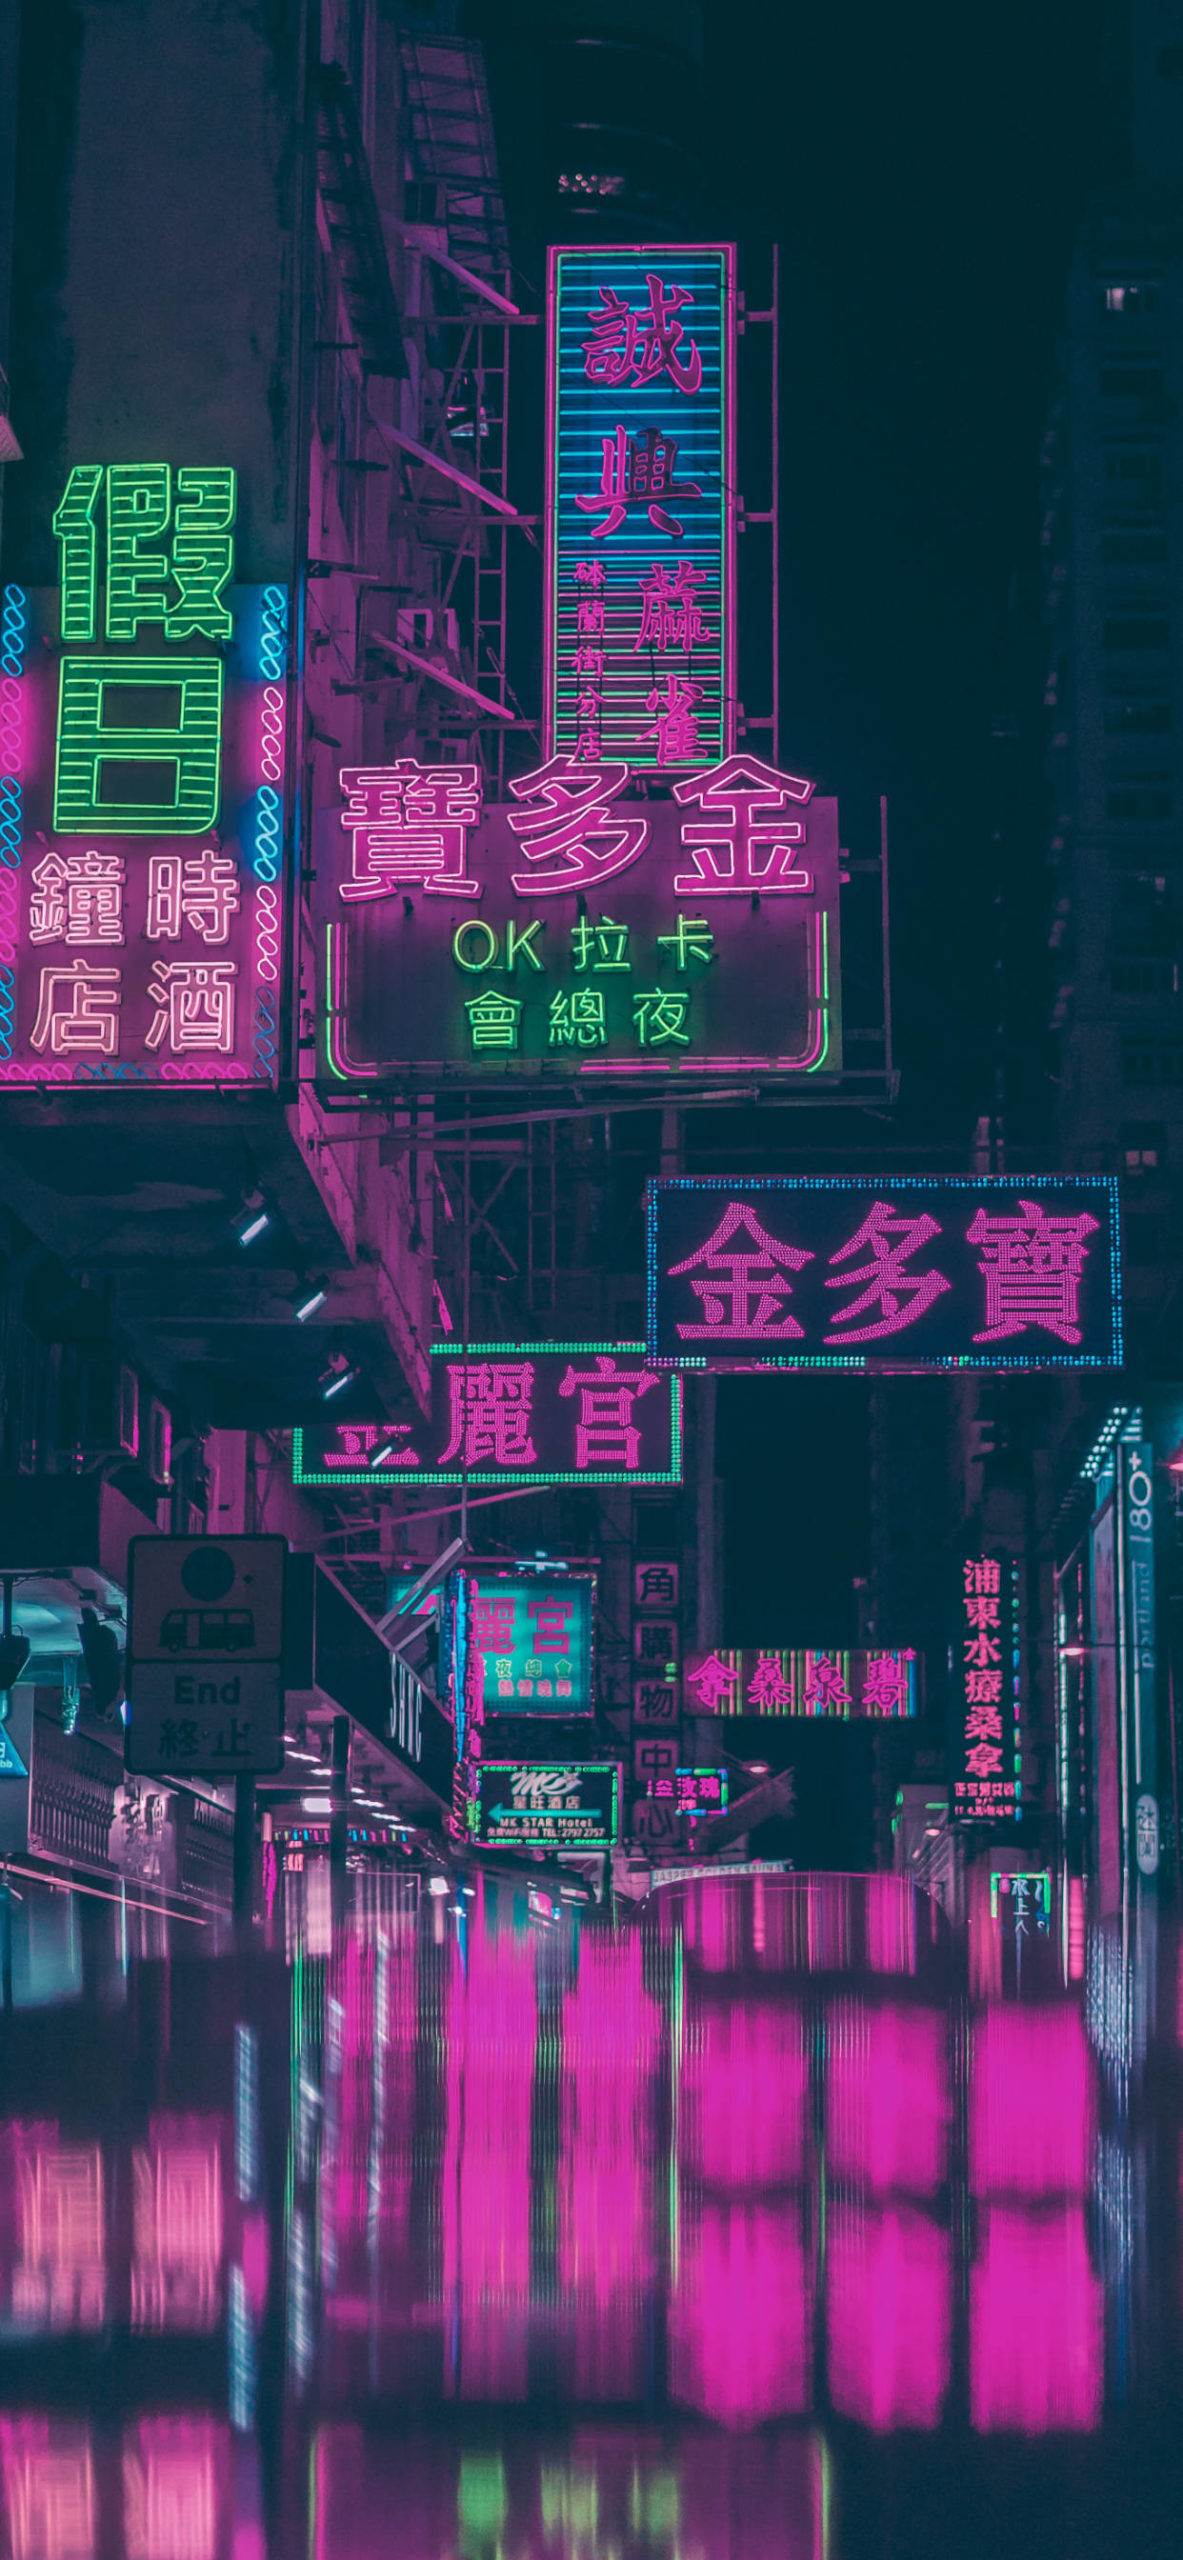 Neon Wallpaper for iPhone Pro Max, X, 6